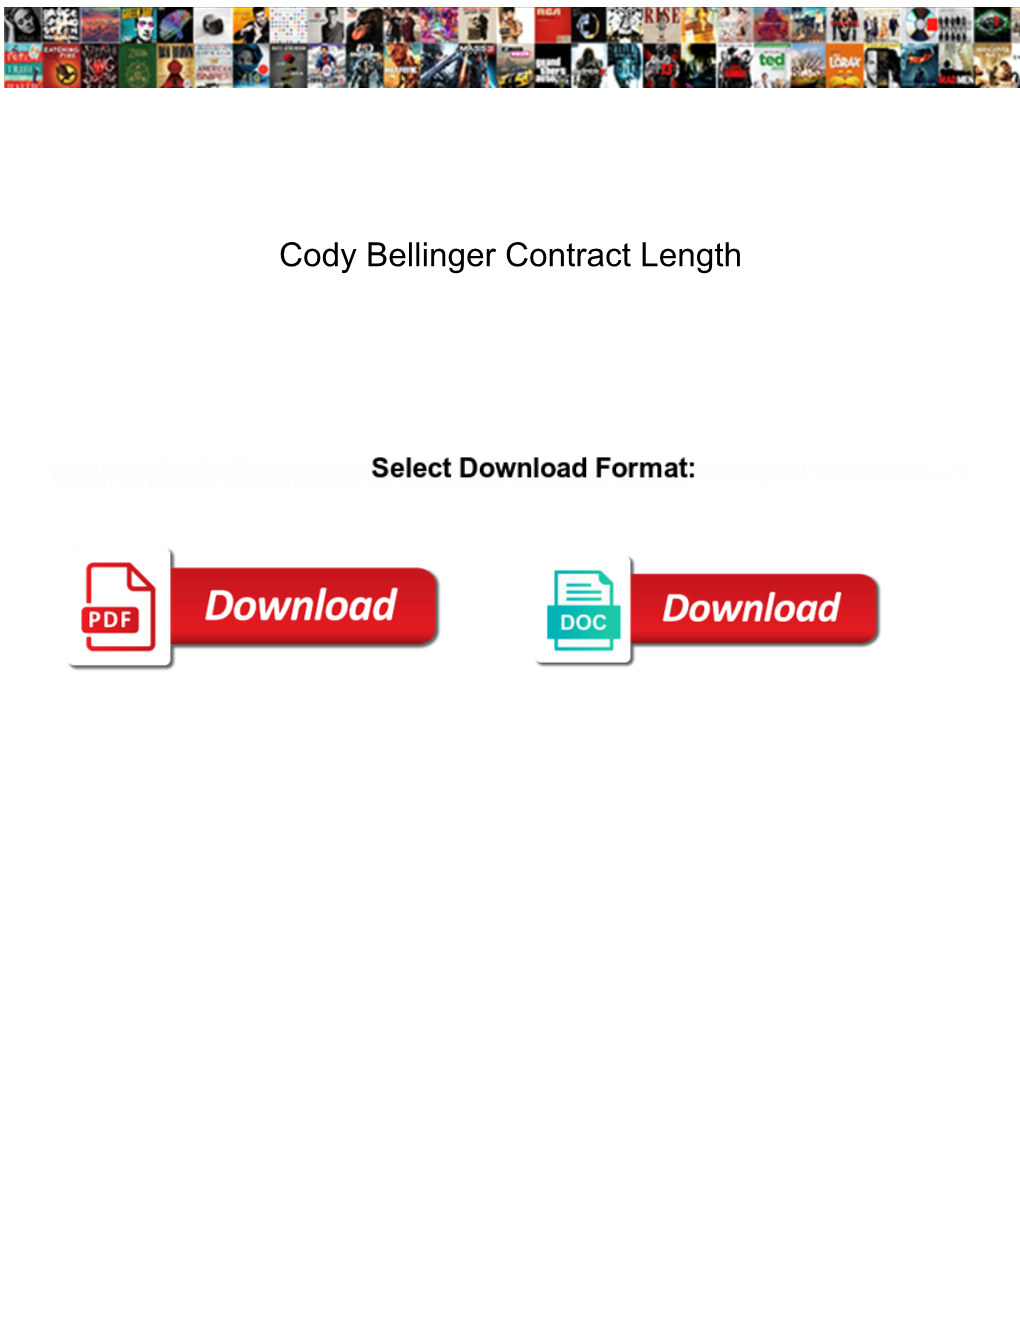 Cody Bellinger Contract Length